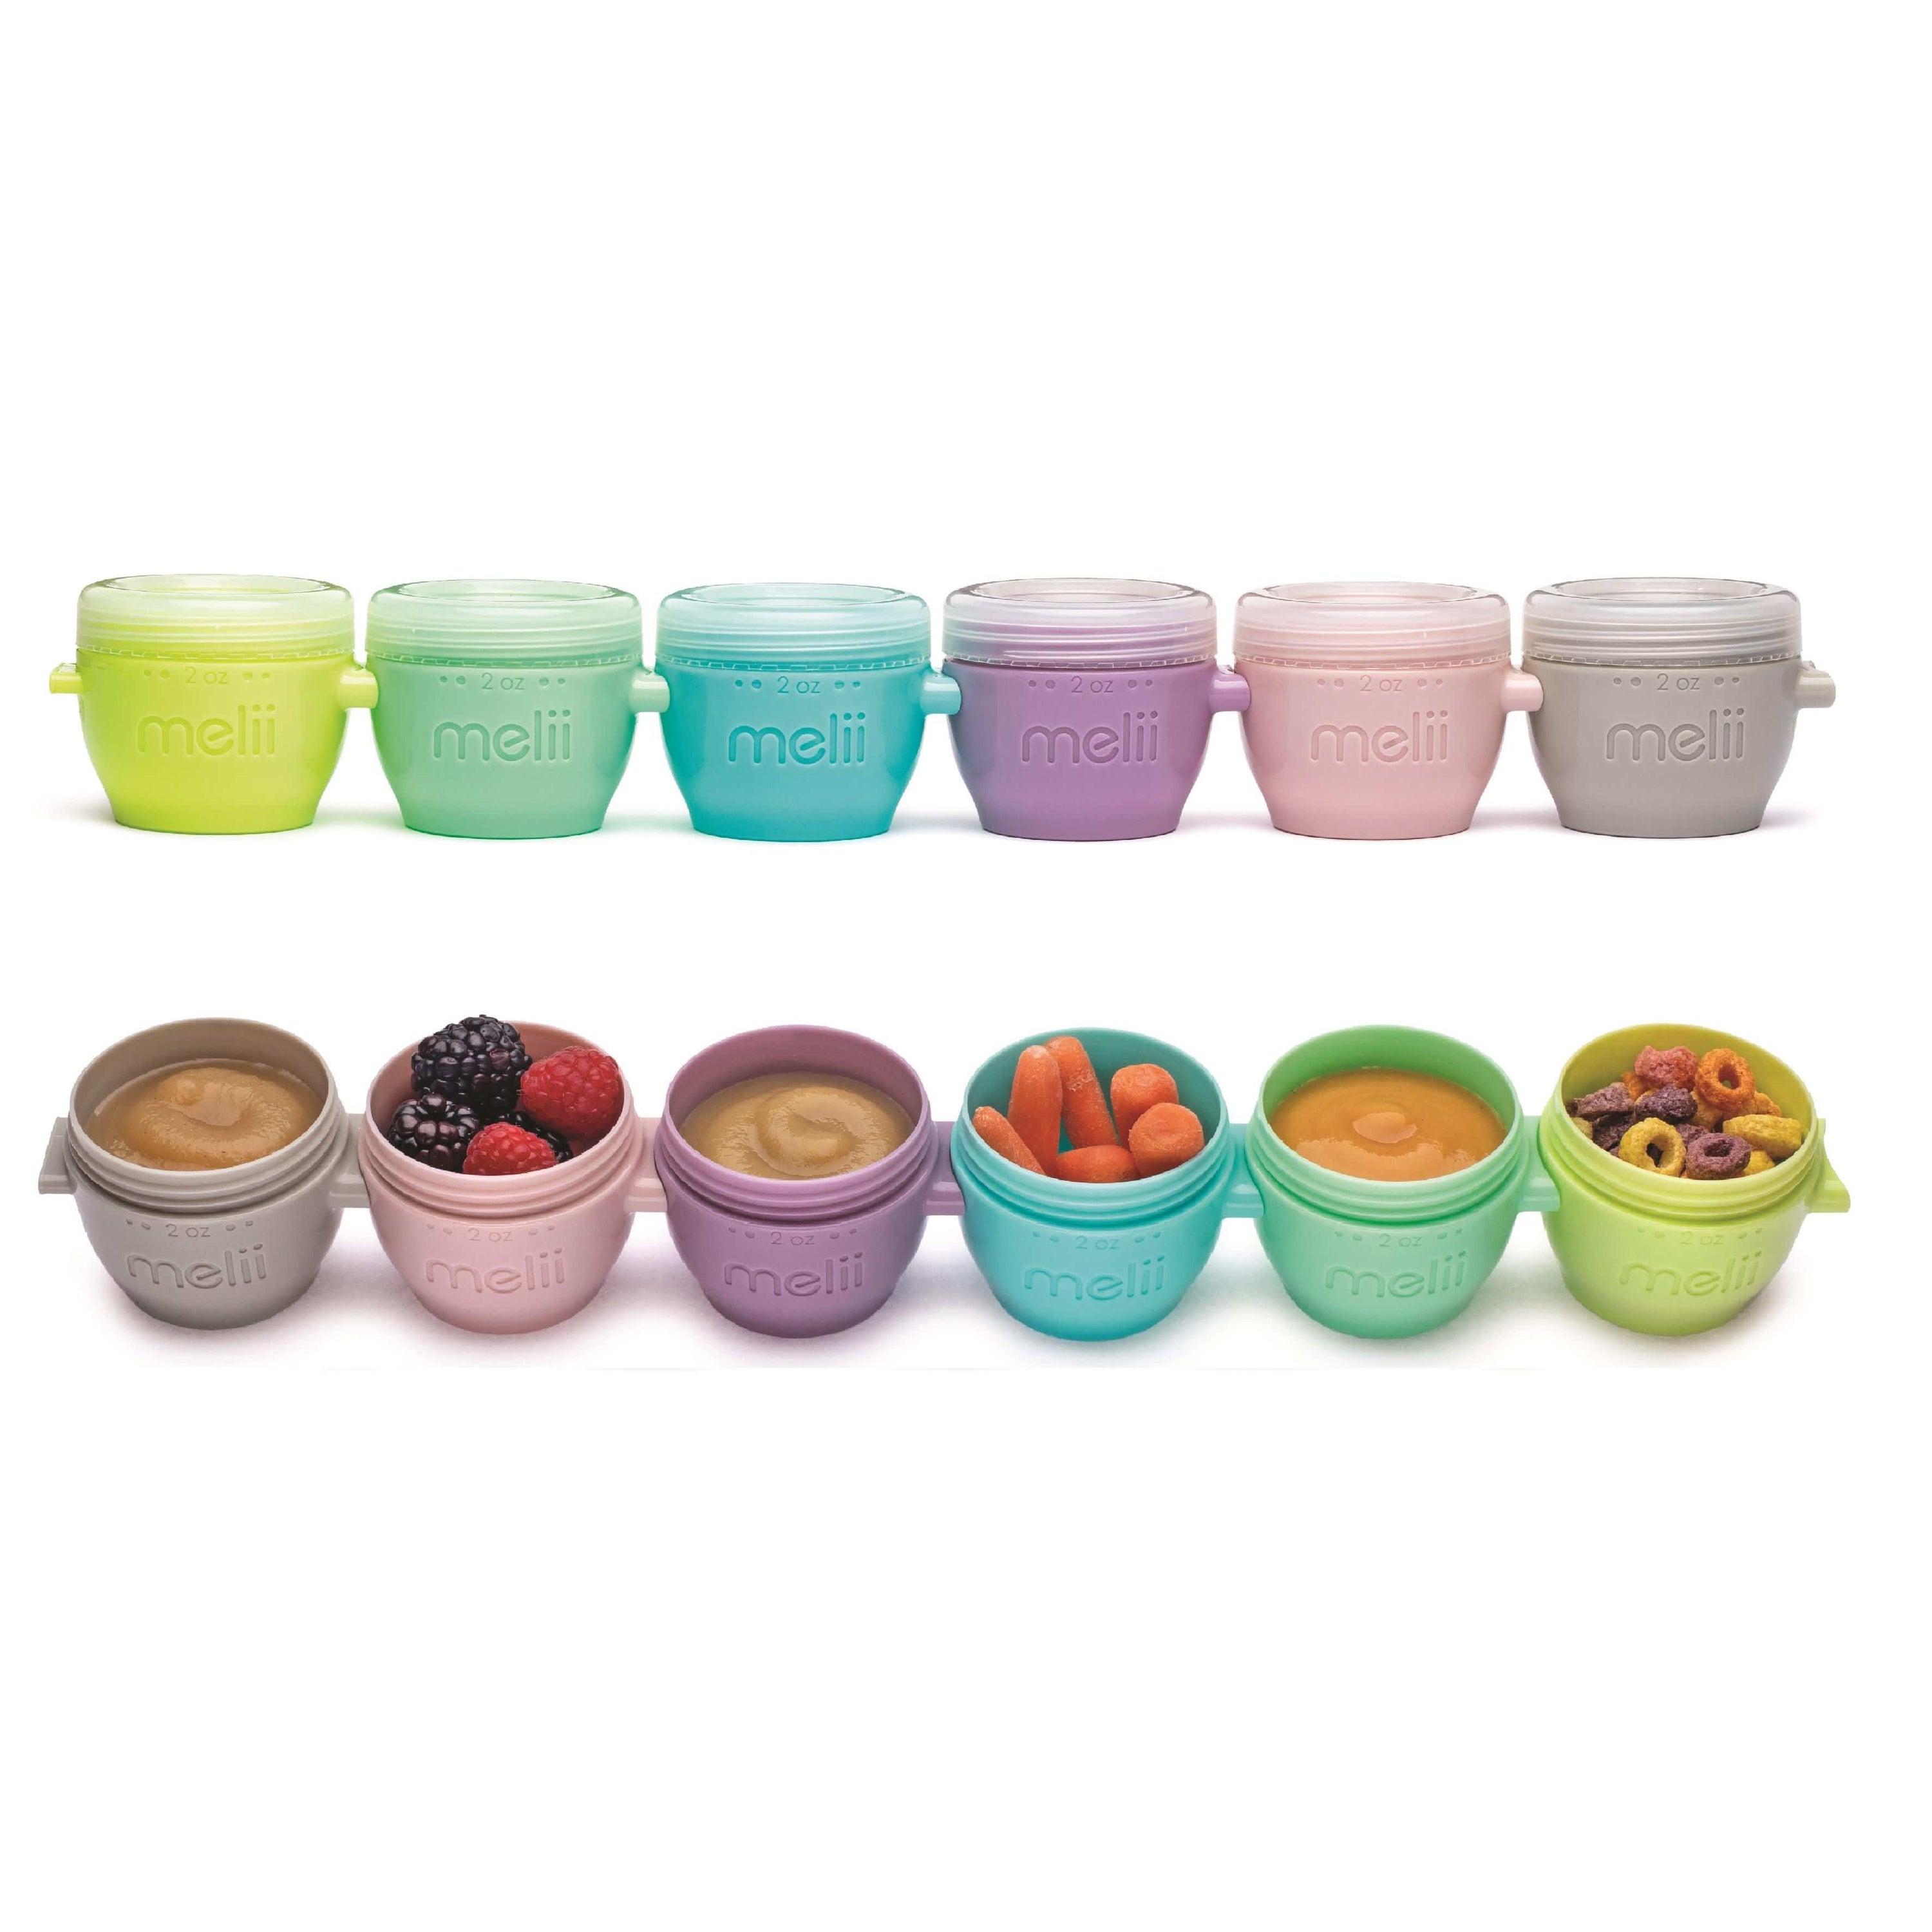 https://www.liltulips.com/cdn/shop/products/2oz-snap-go-pods-6-freezer-snack-containers-melii-lil-tulips-28193855668342.jpg?v=1633484357&width=3000